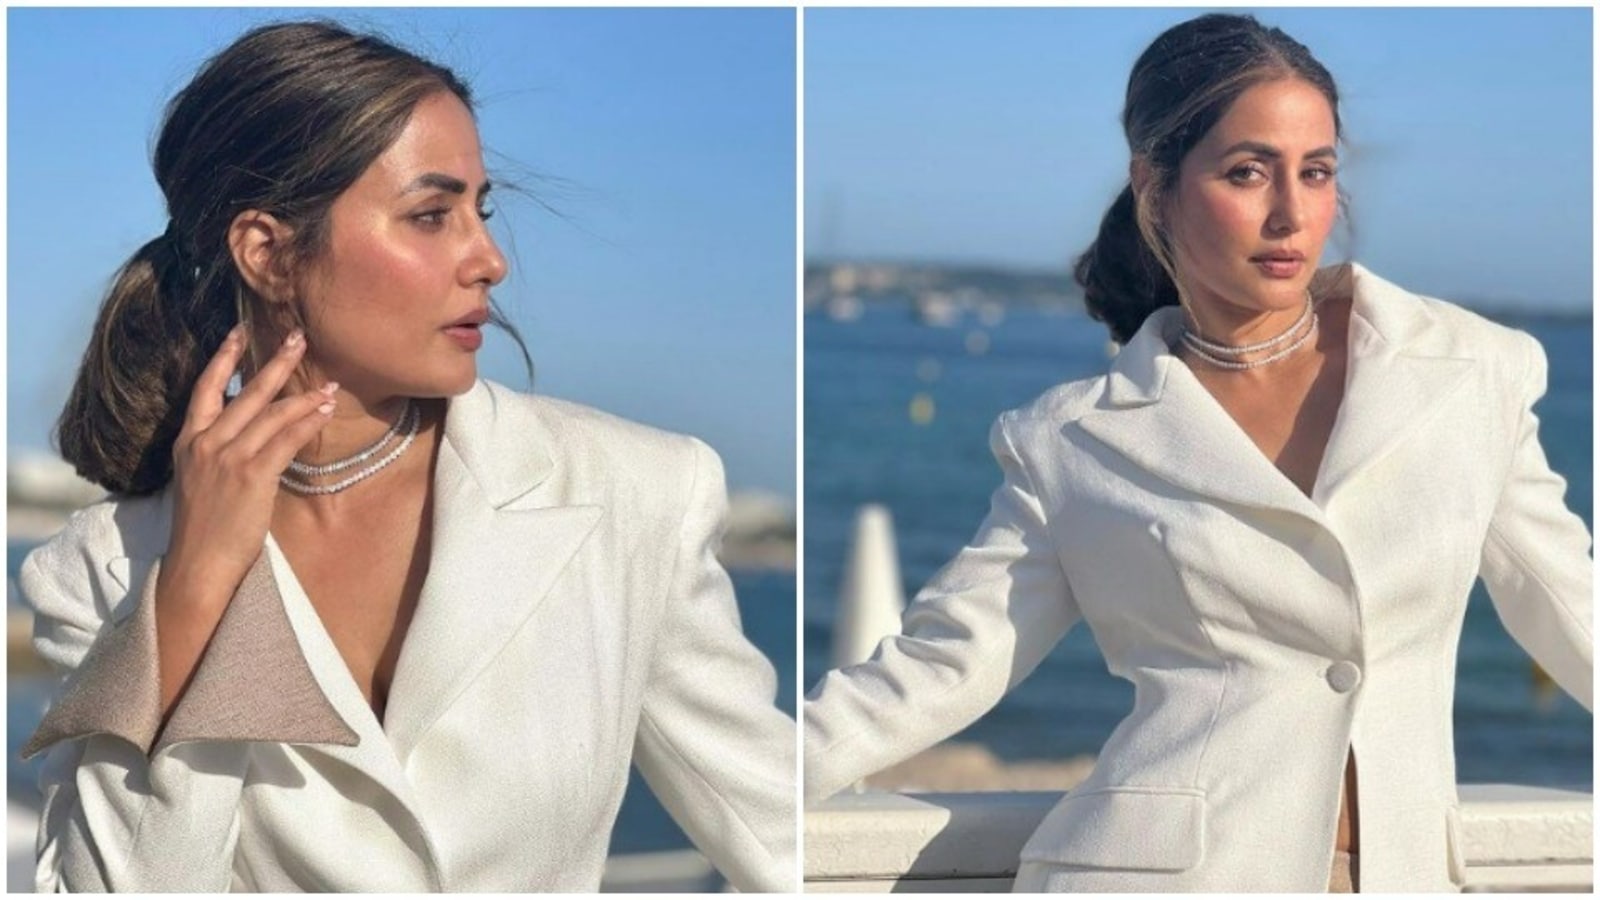 Cannes 2022: Hina Khan mergers boss lady and diva vibes at the French Riviera